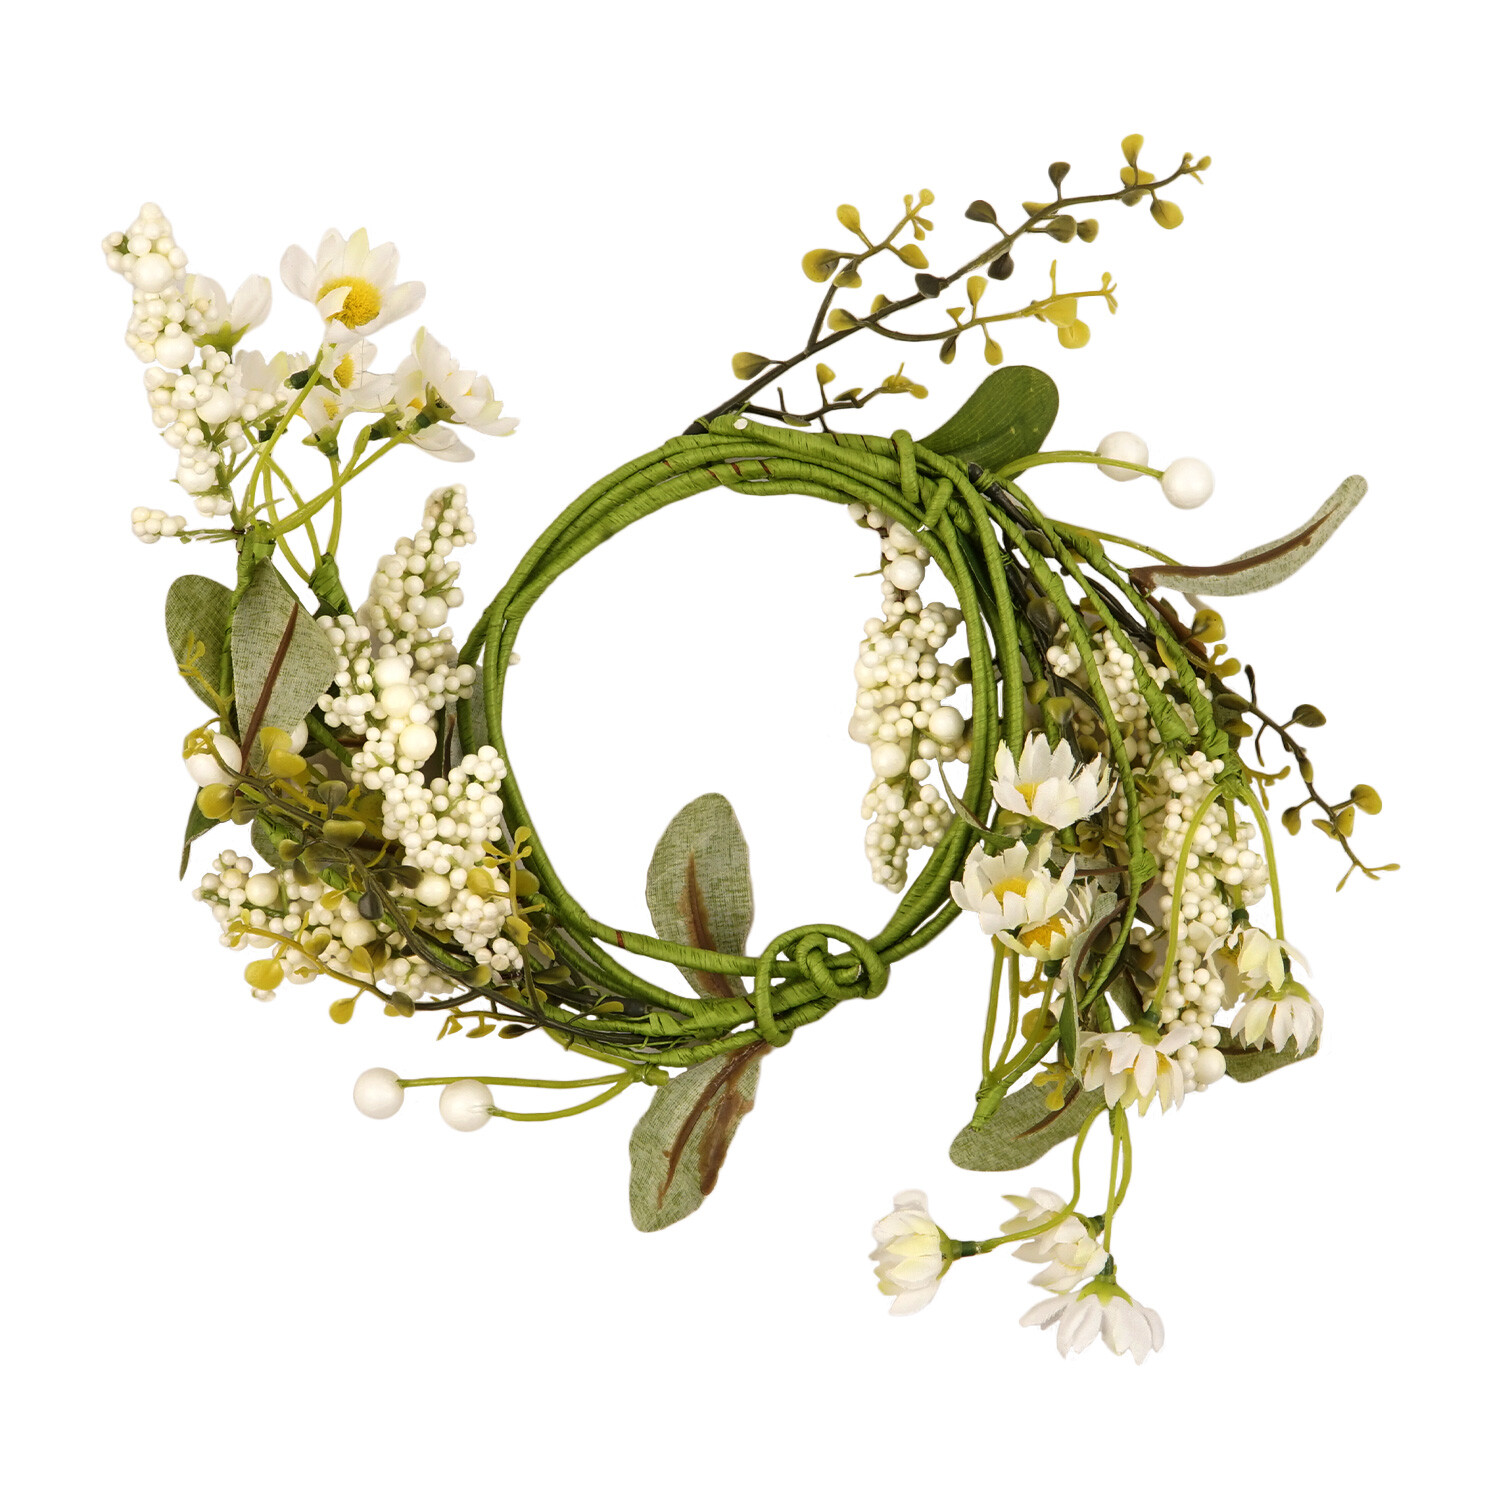 Small White & Green Artificial Garland - Green & White Image